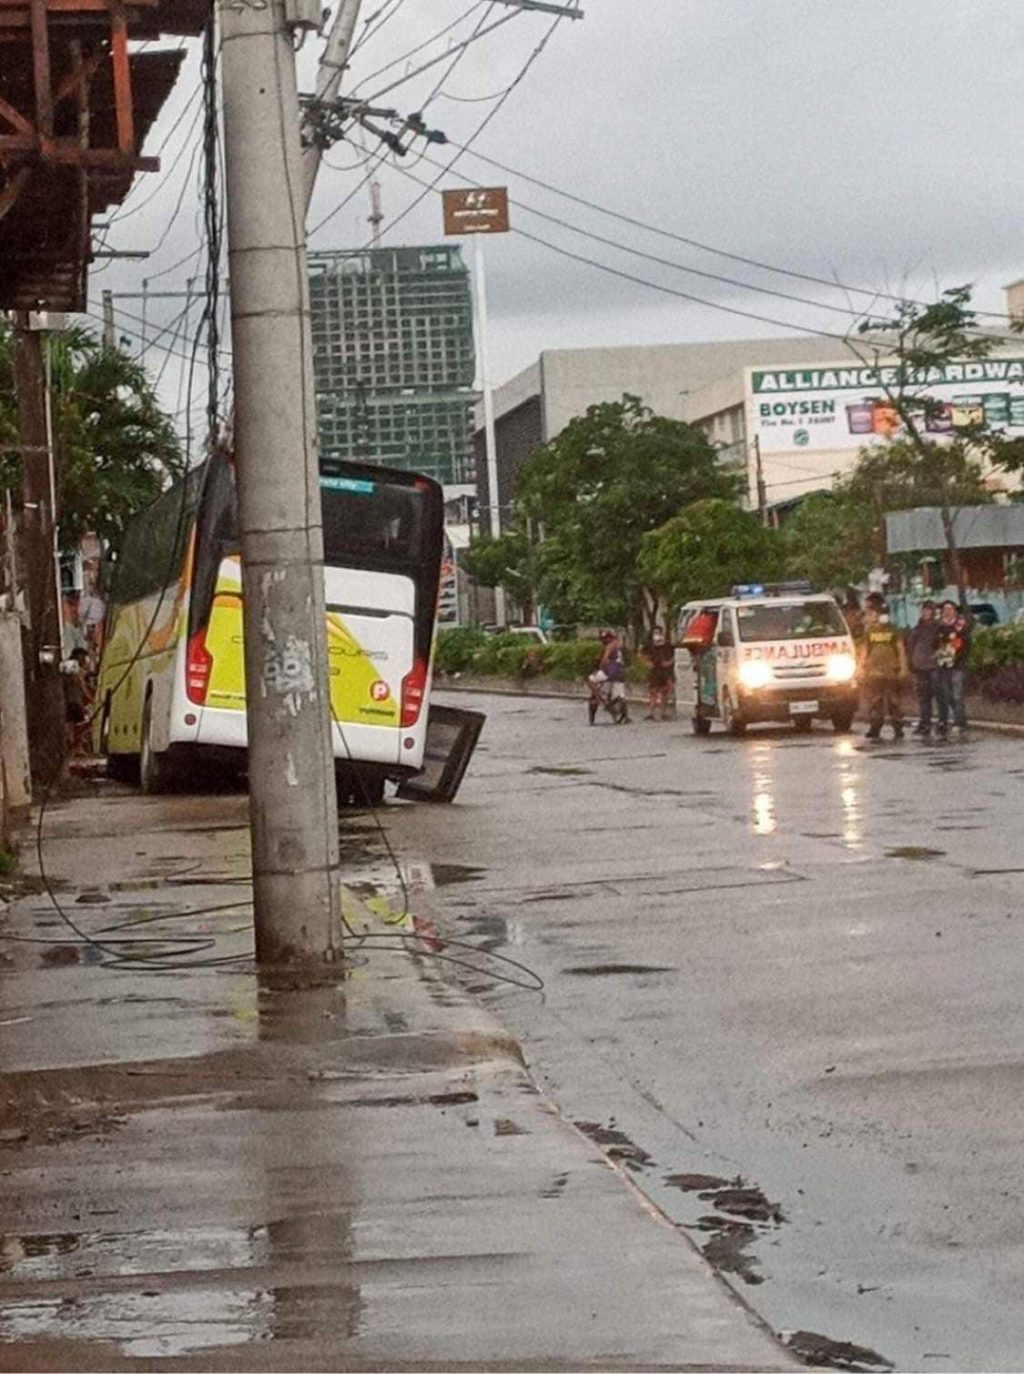 Motorists are warned to give way to emergency vehicles. The warning was made after a Ceres bus and an ambulance collided in an intersection in Barangay Carreta, Cebu City on Sunday, October 25. Nine were injured in the accident. CDN Digital | Paul Lauro